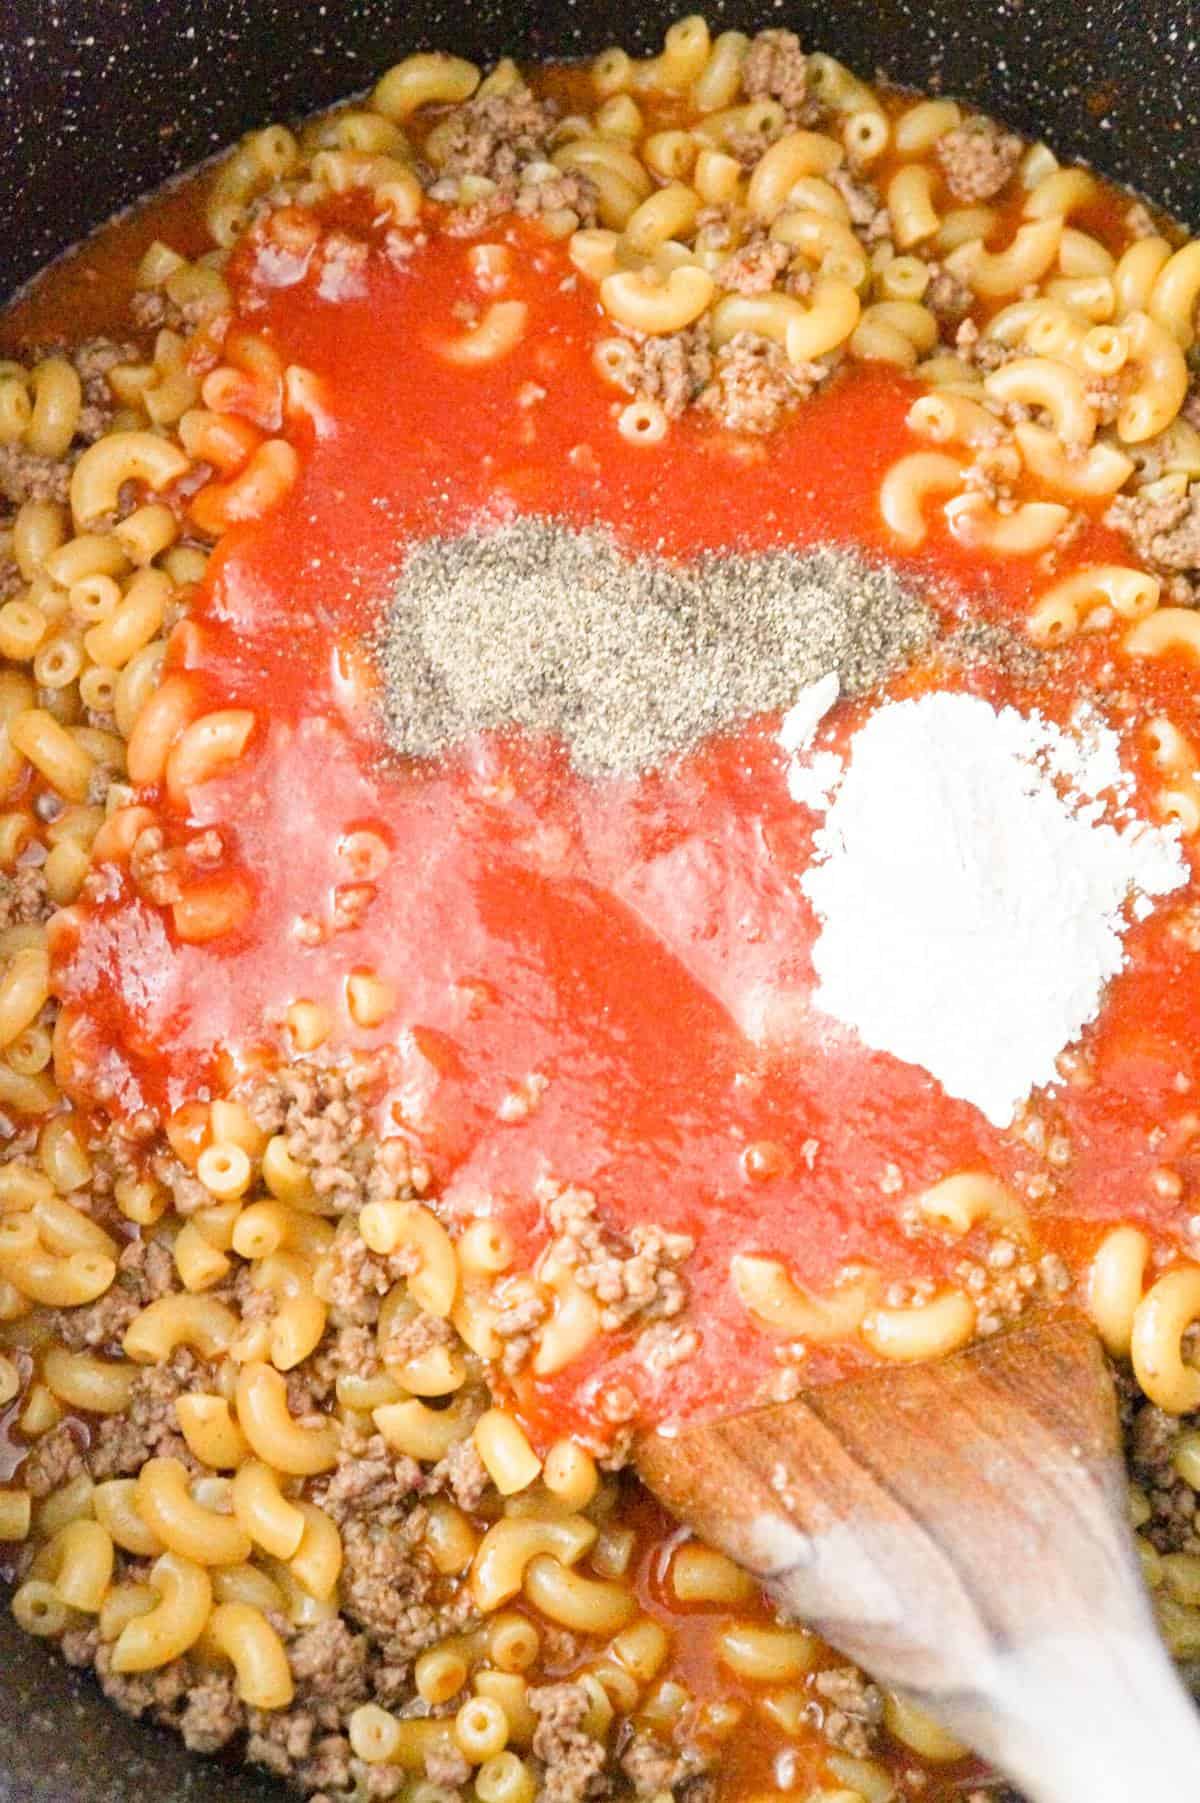 tomato sauce, salsa and spices on top of cooked macaroni and ground beef in a large pot